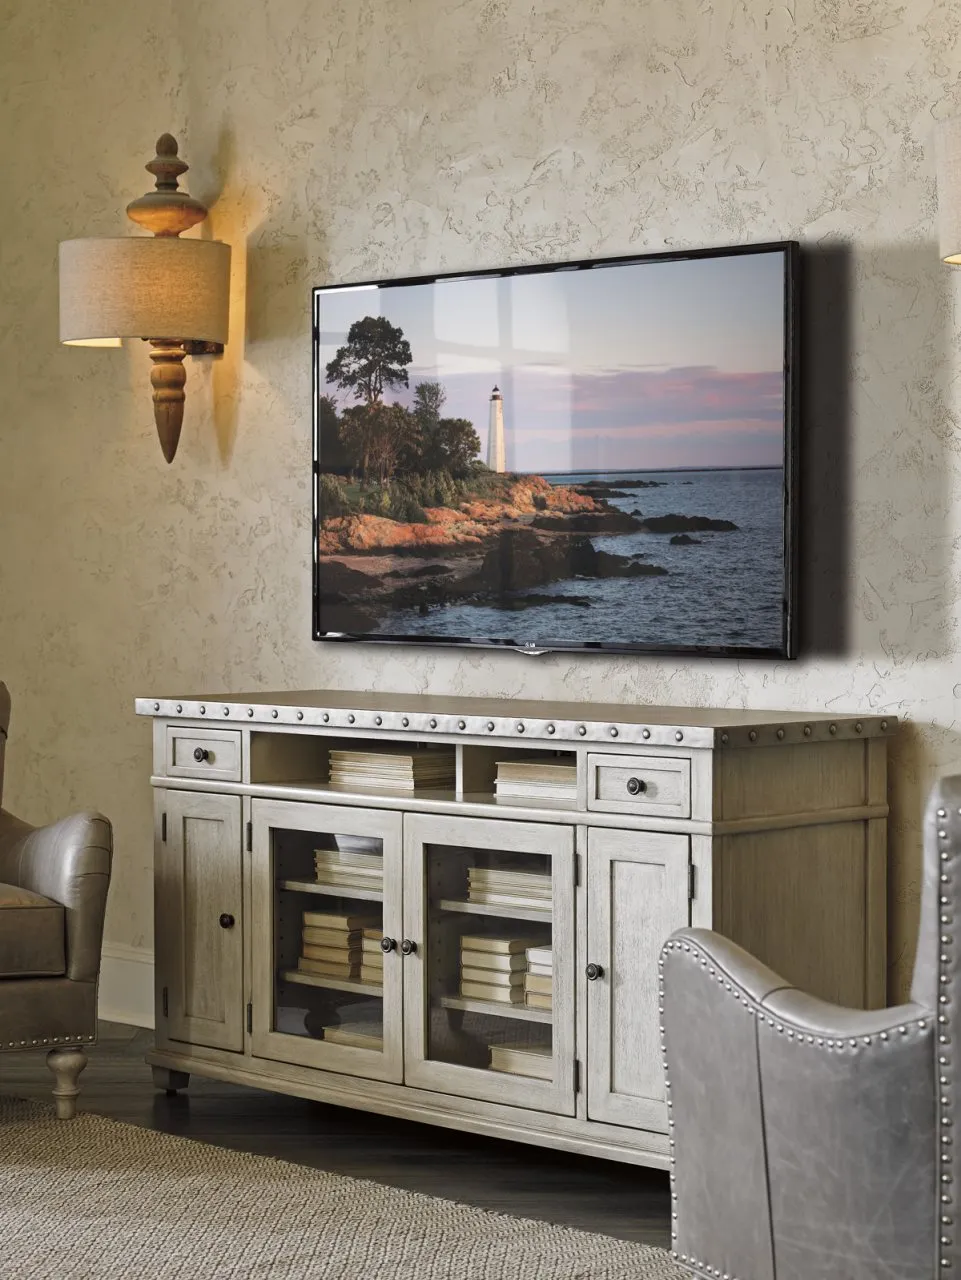 SHADOW VALLEY MEDIA CONSOLE OYSTER BAY